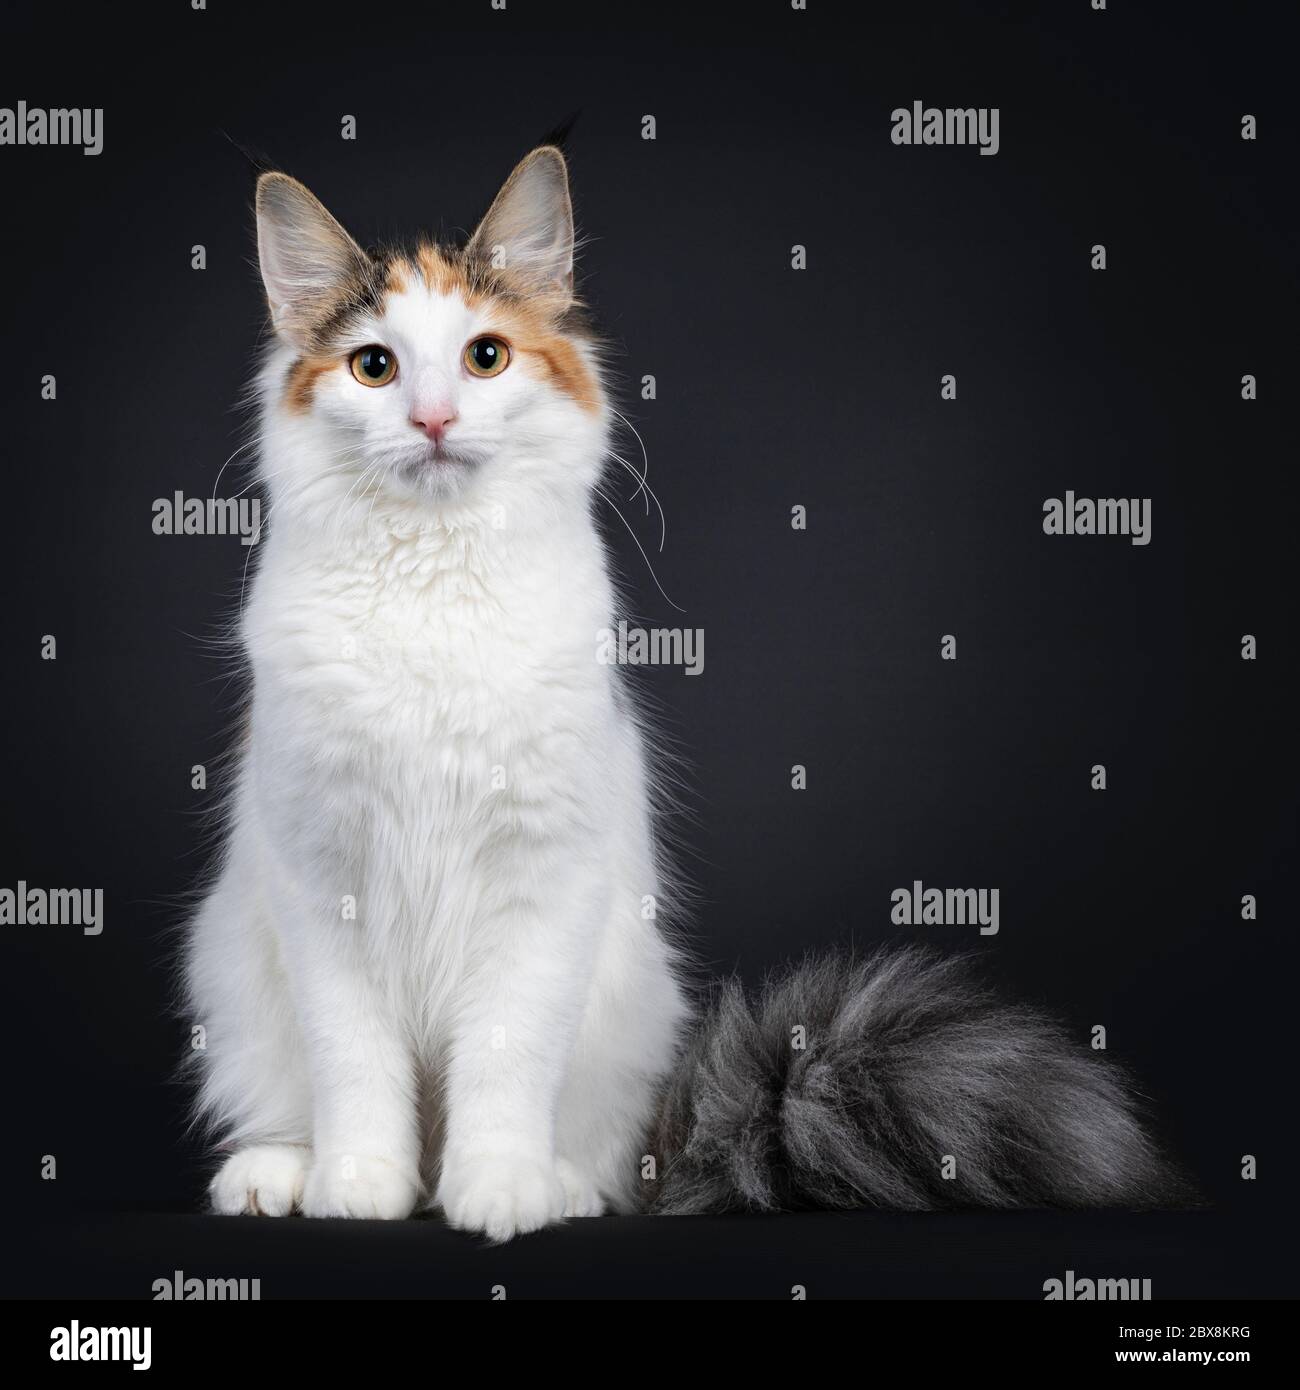 Cute young Norwegian Forestcat cat, sitting facing front. Looking straight at lens. Fluffy tail beside body. Isolated on black background. Stock Photo